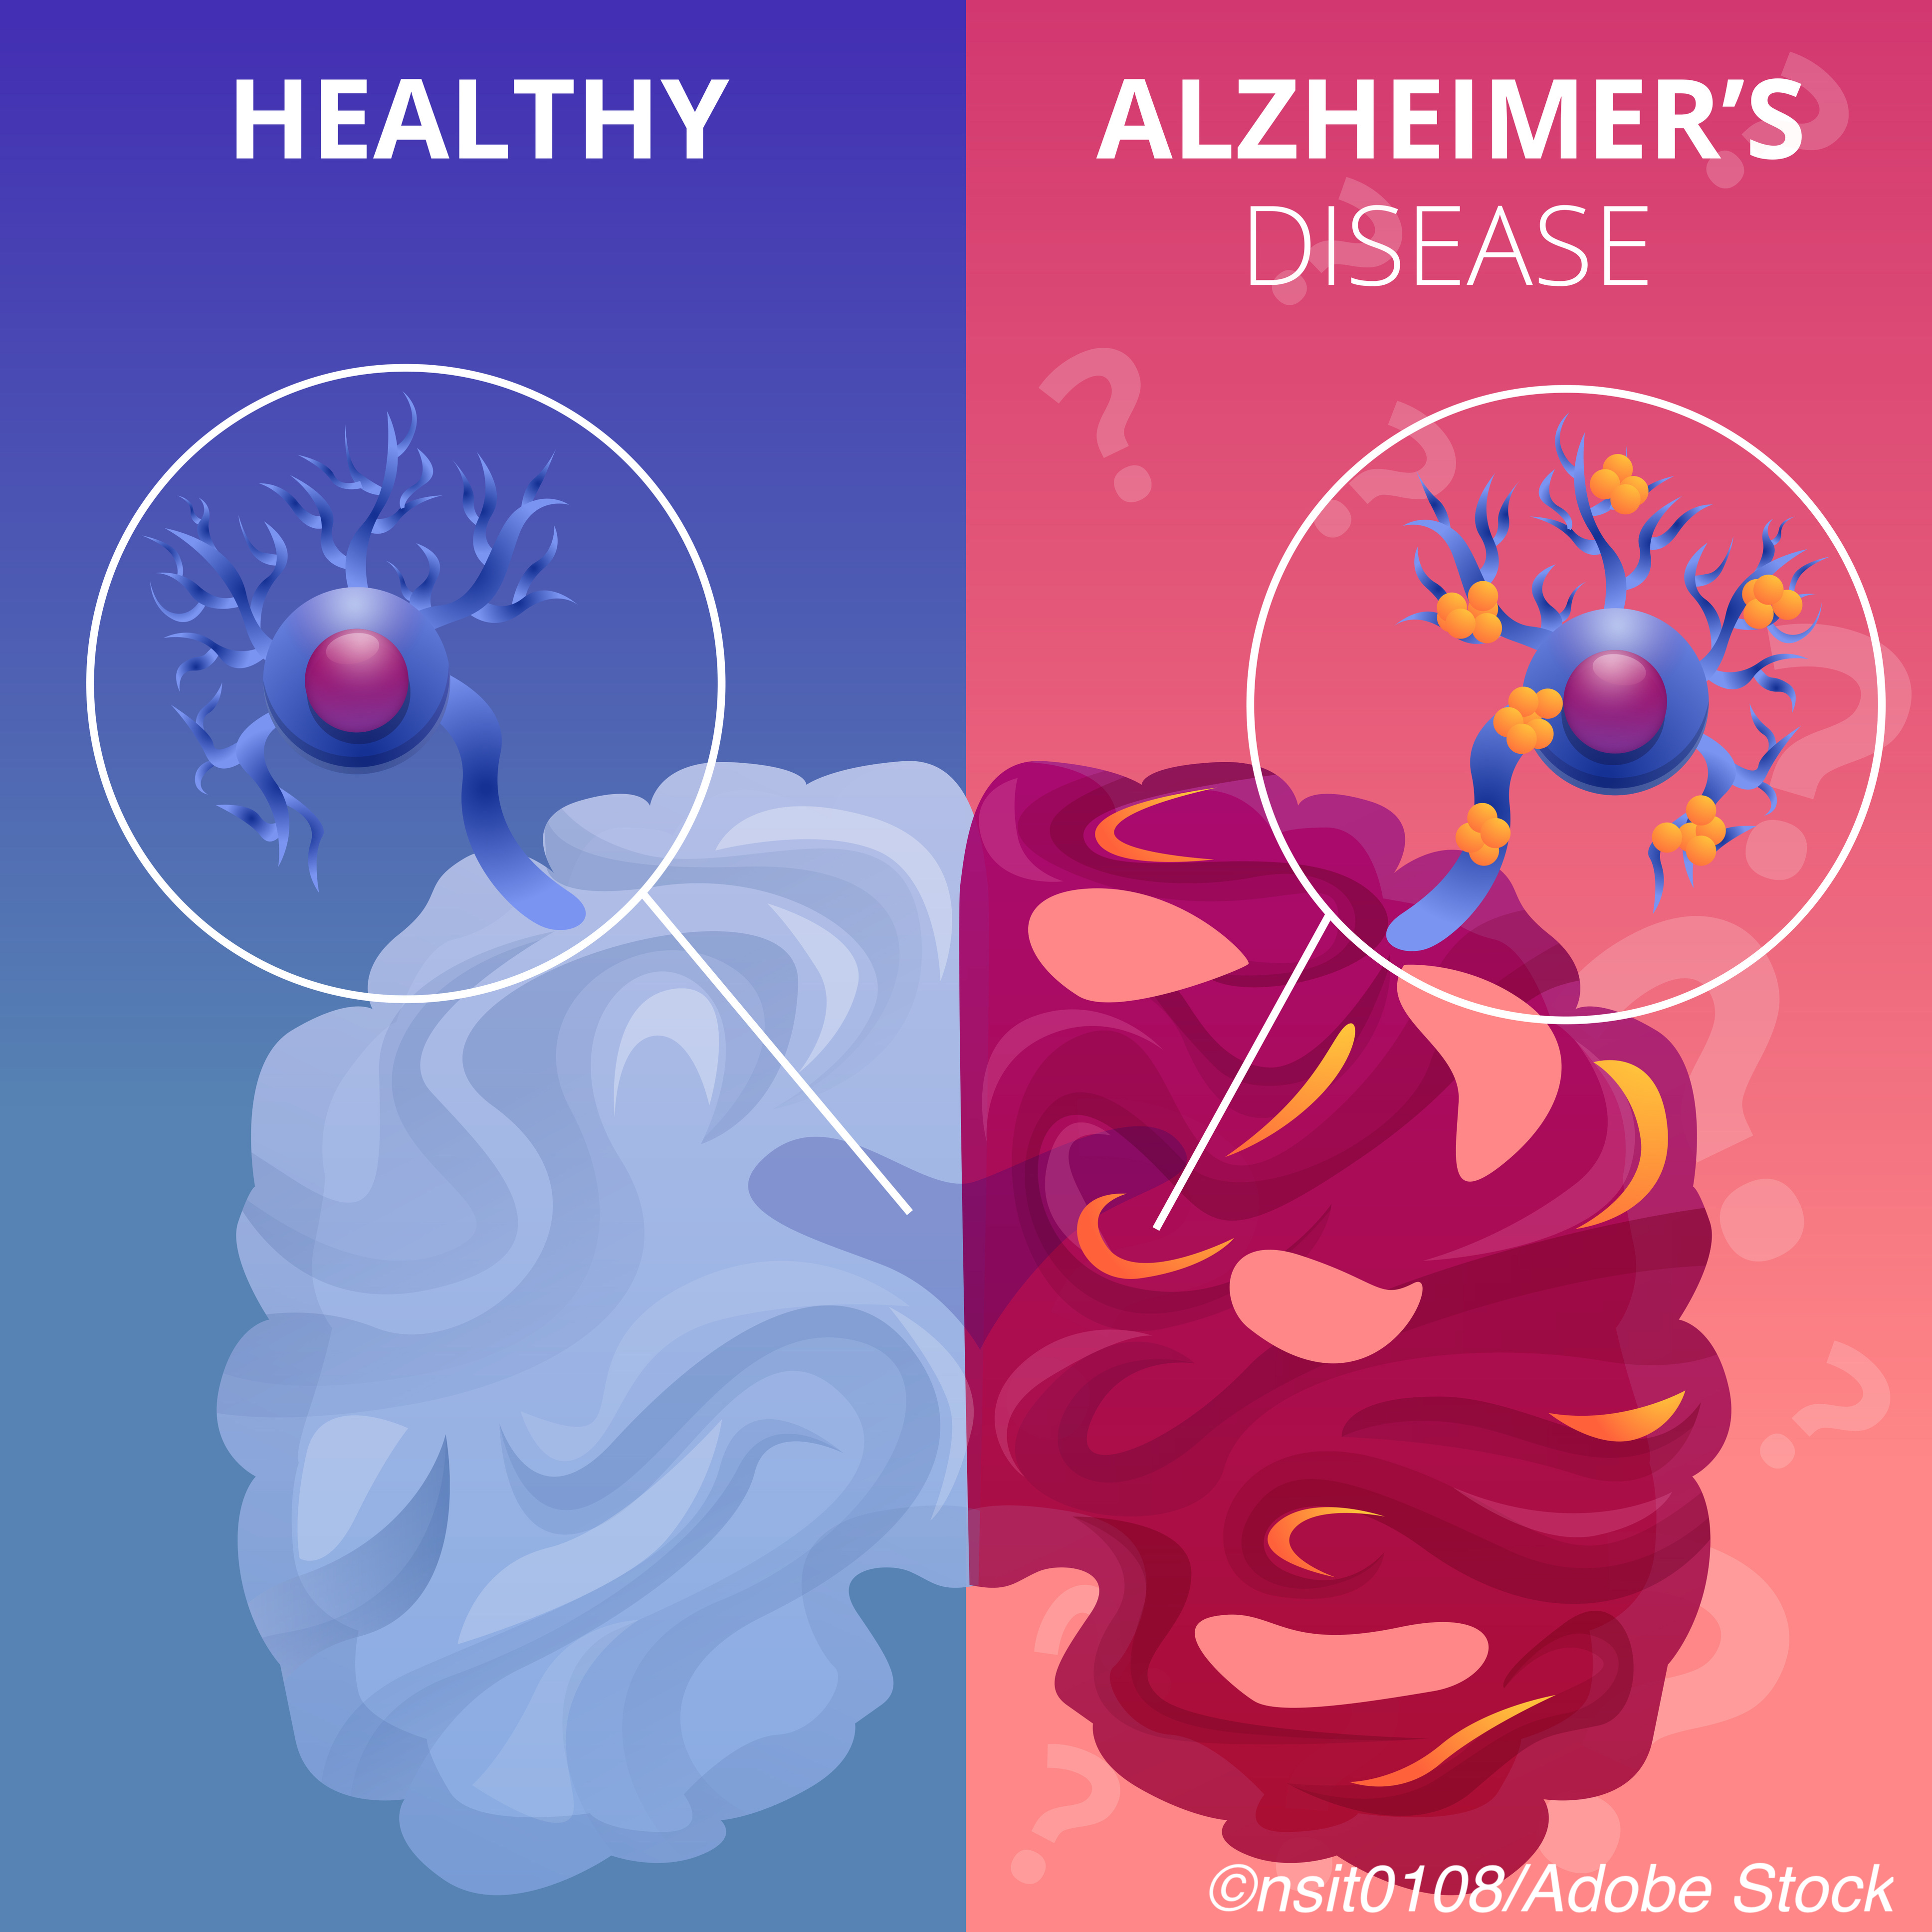 International Working Group: Biomarkers Alone Not Enough for Alzheimer’s Dx